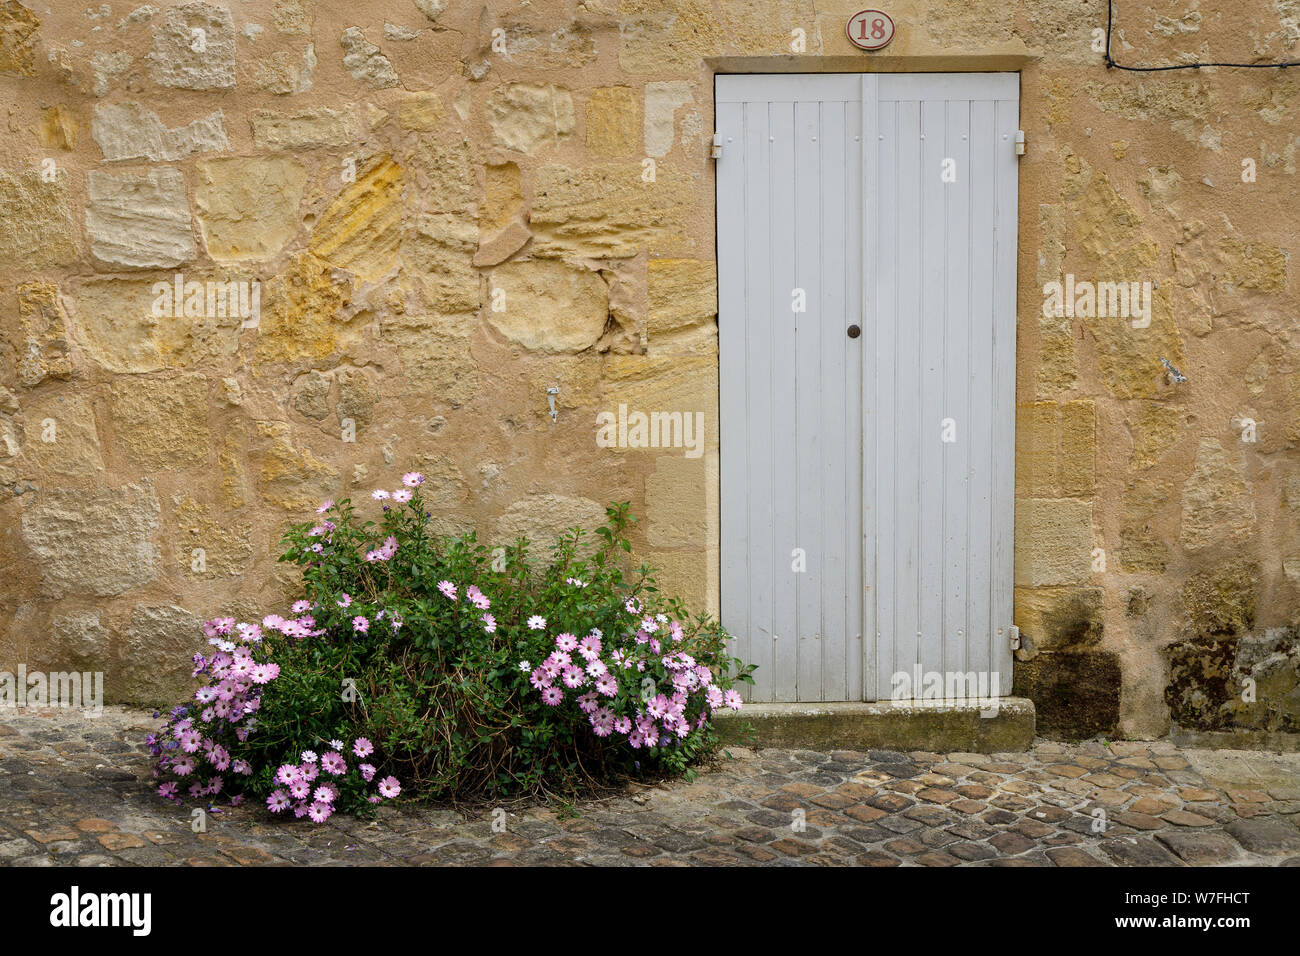 Saint Émilion yellow sandstone building with painted doorway and pink daisy growing outside over cobbled street. Gironde region, France. Stock Photo